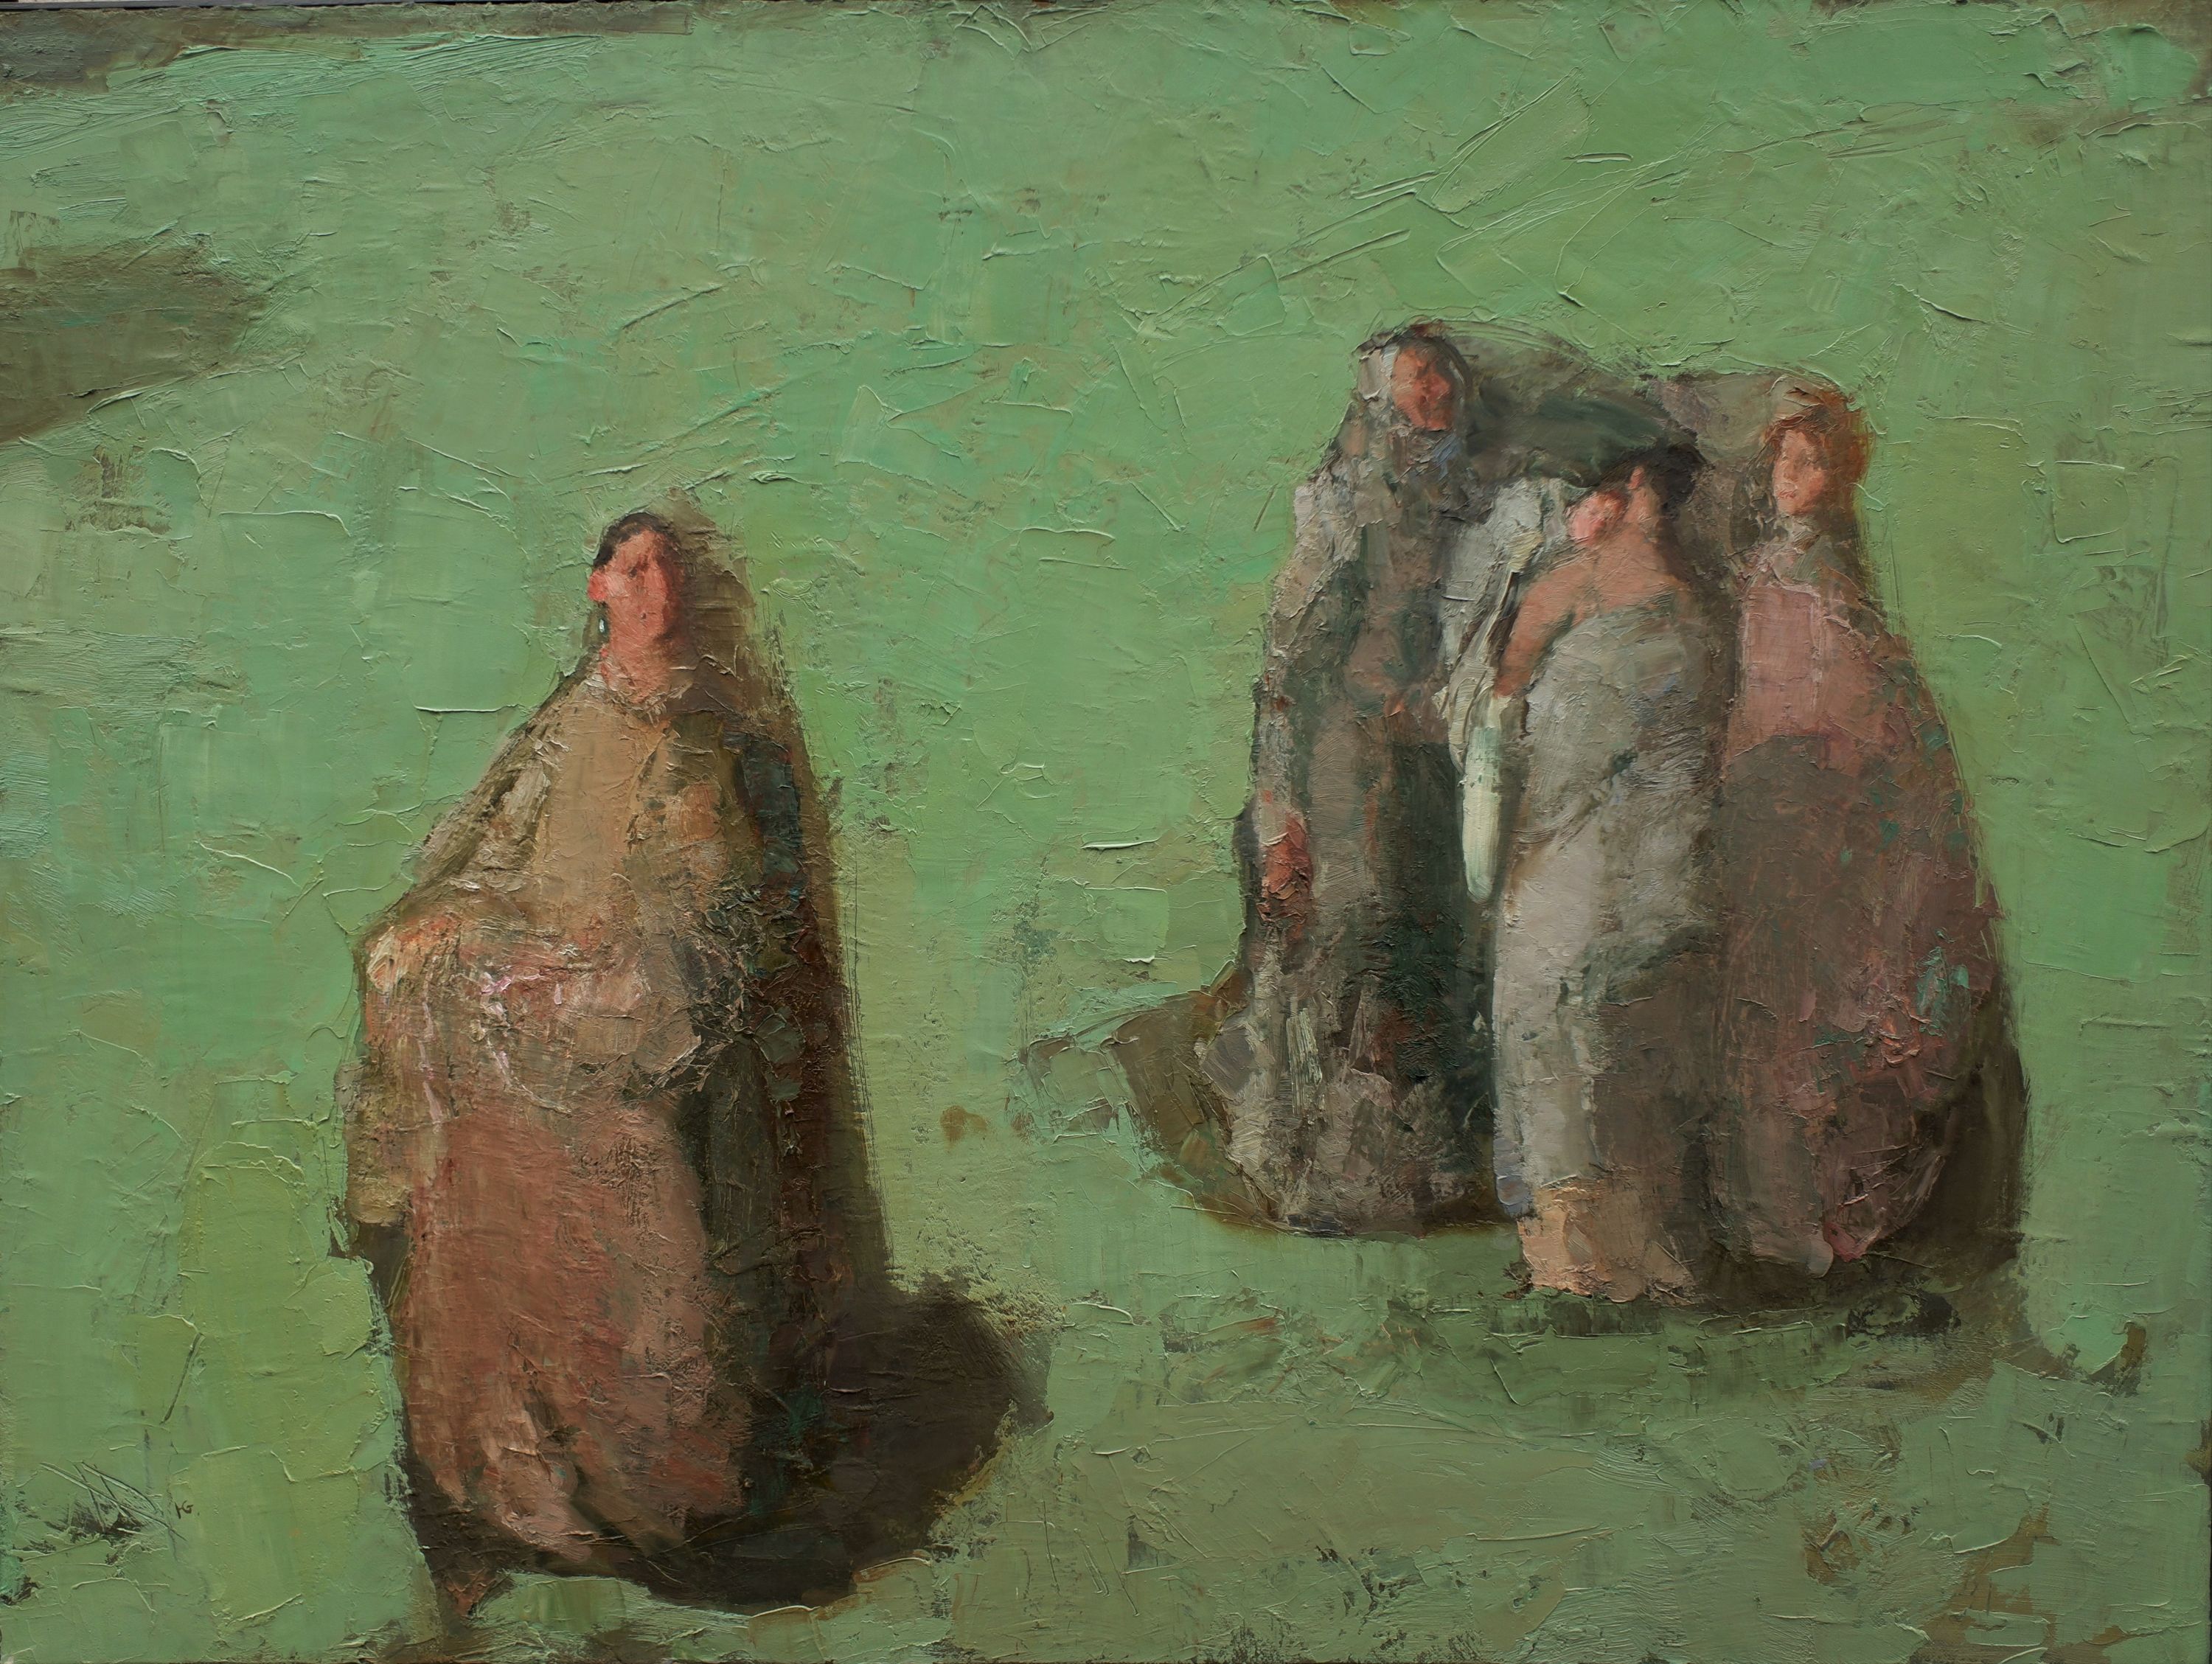 Olga Geoghegan, (b.1965), Me, My Mother, Sister and Grandmother, 2015, oil on canvas, 100 x 70 cm